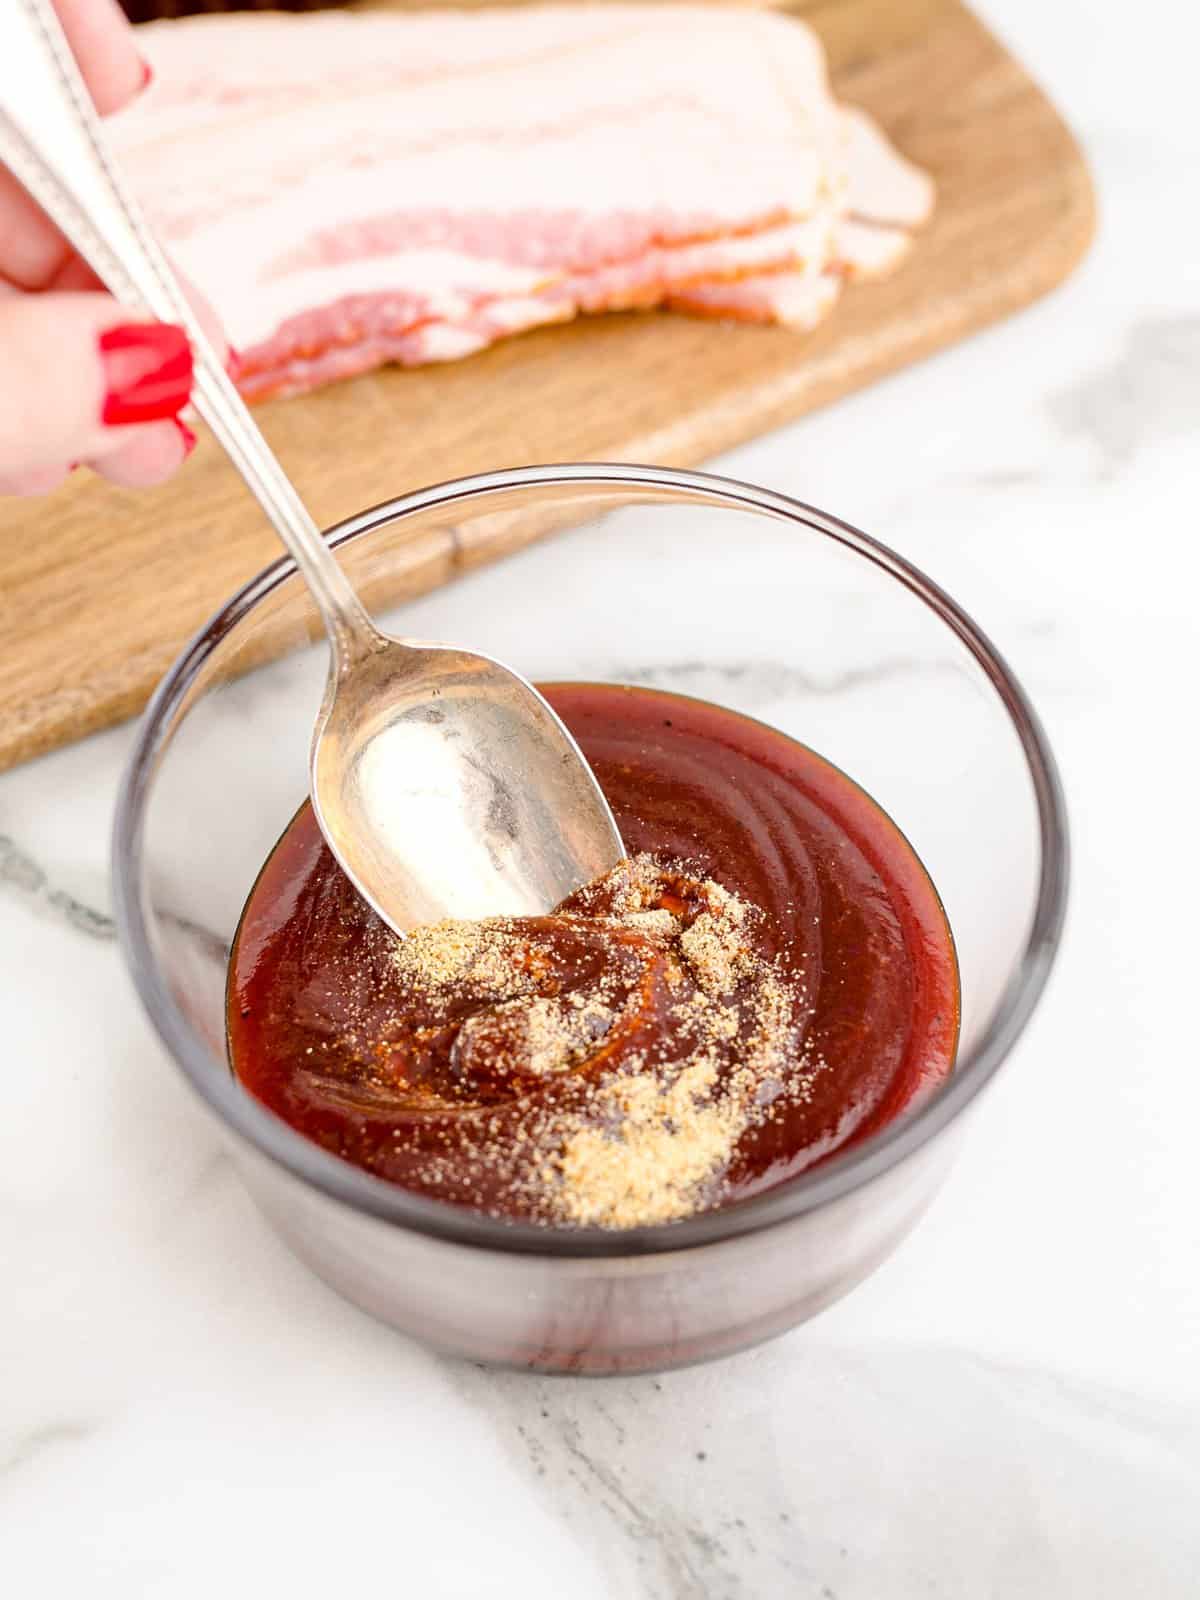 a spoon shown mixing together barbecue sauce and garlic powder in a small clear bowl.